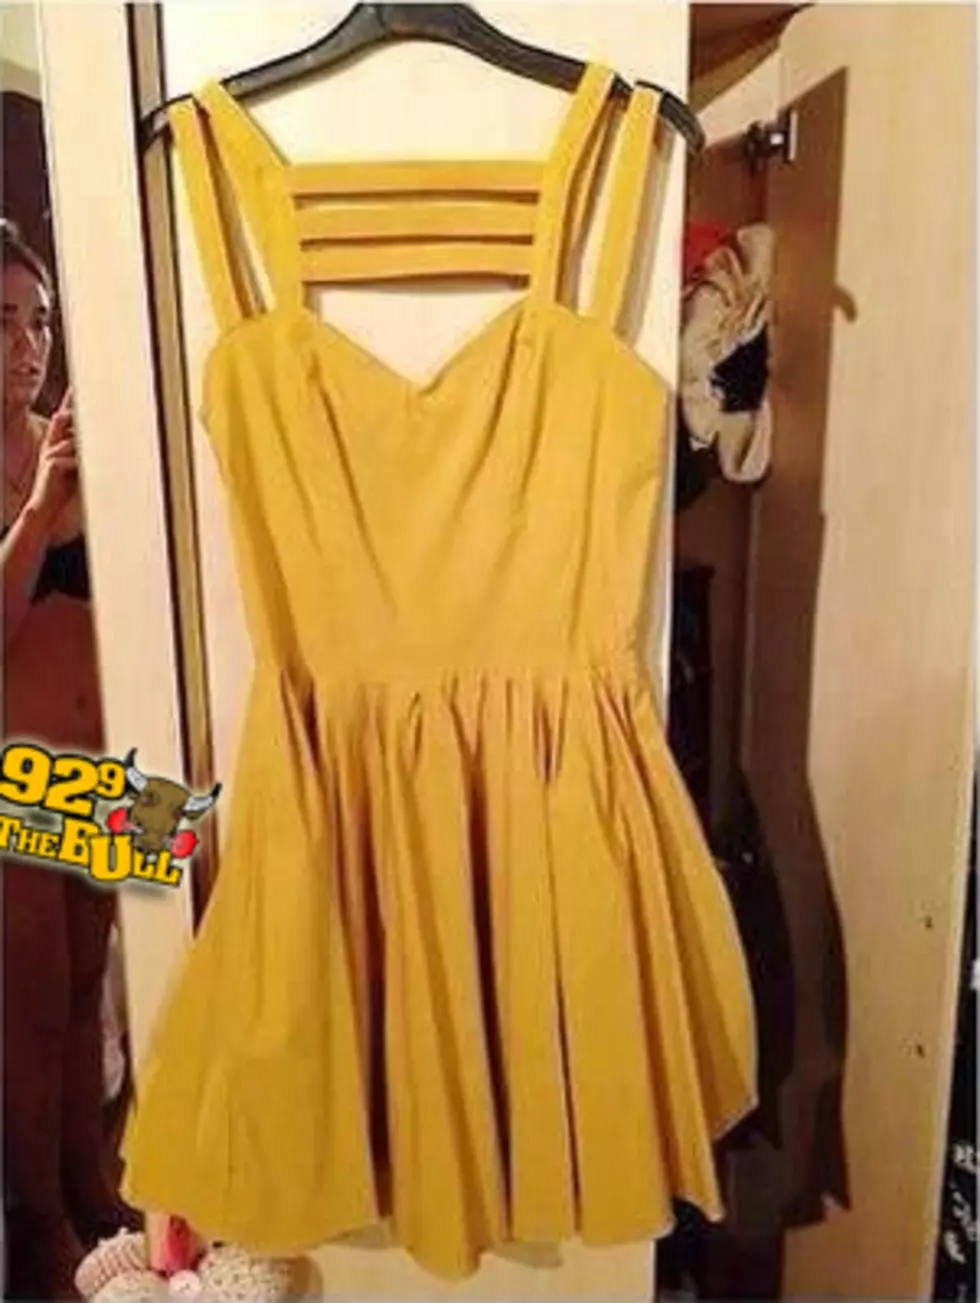 A Posting for a Dress on eBay Went Viral . . . Because the Woman Selling it &#8220;Accidentally&#8221; Included a Naked Photo of Herself